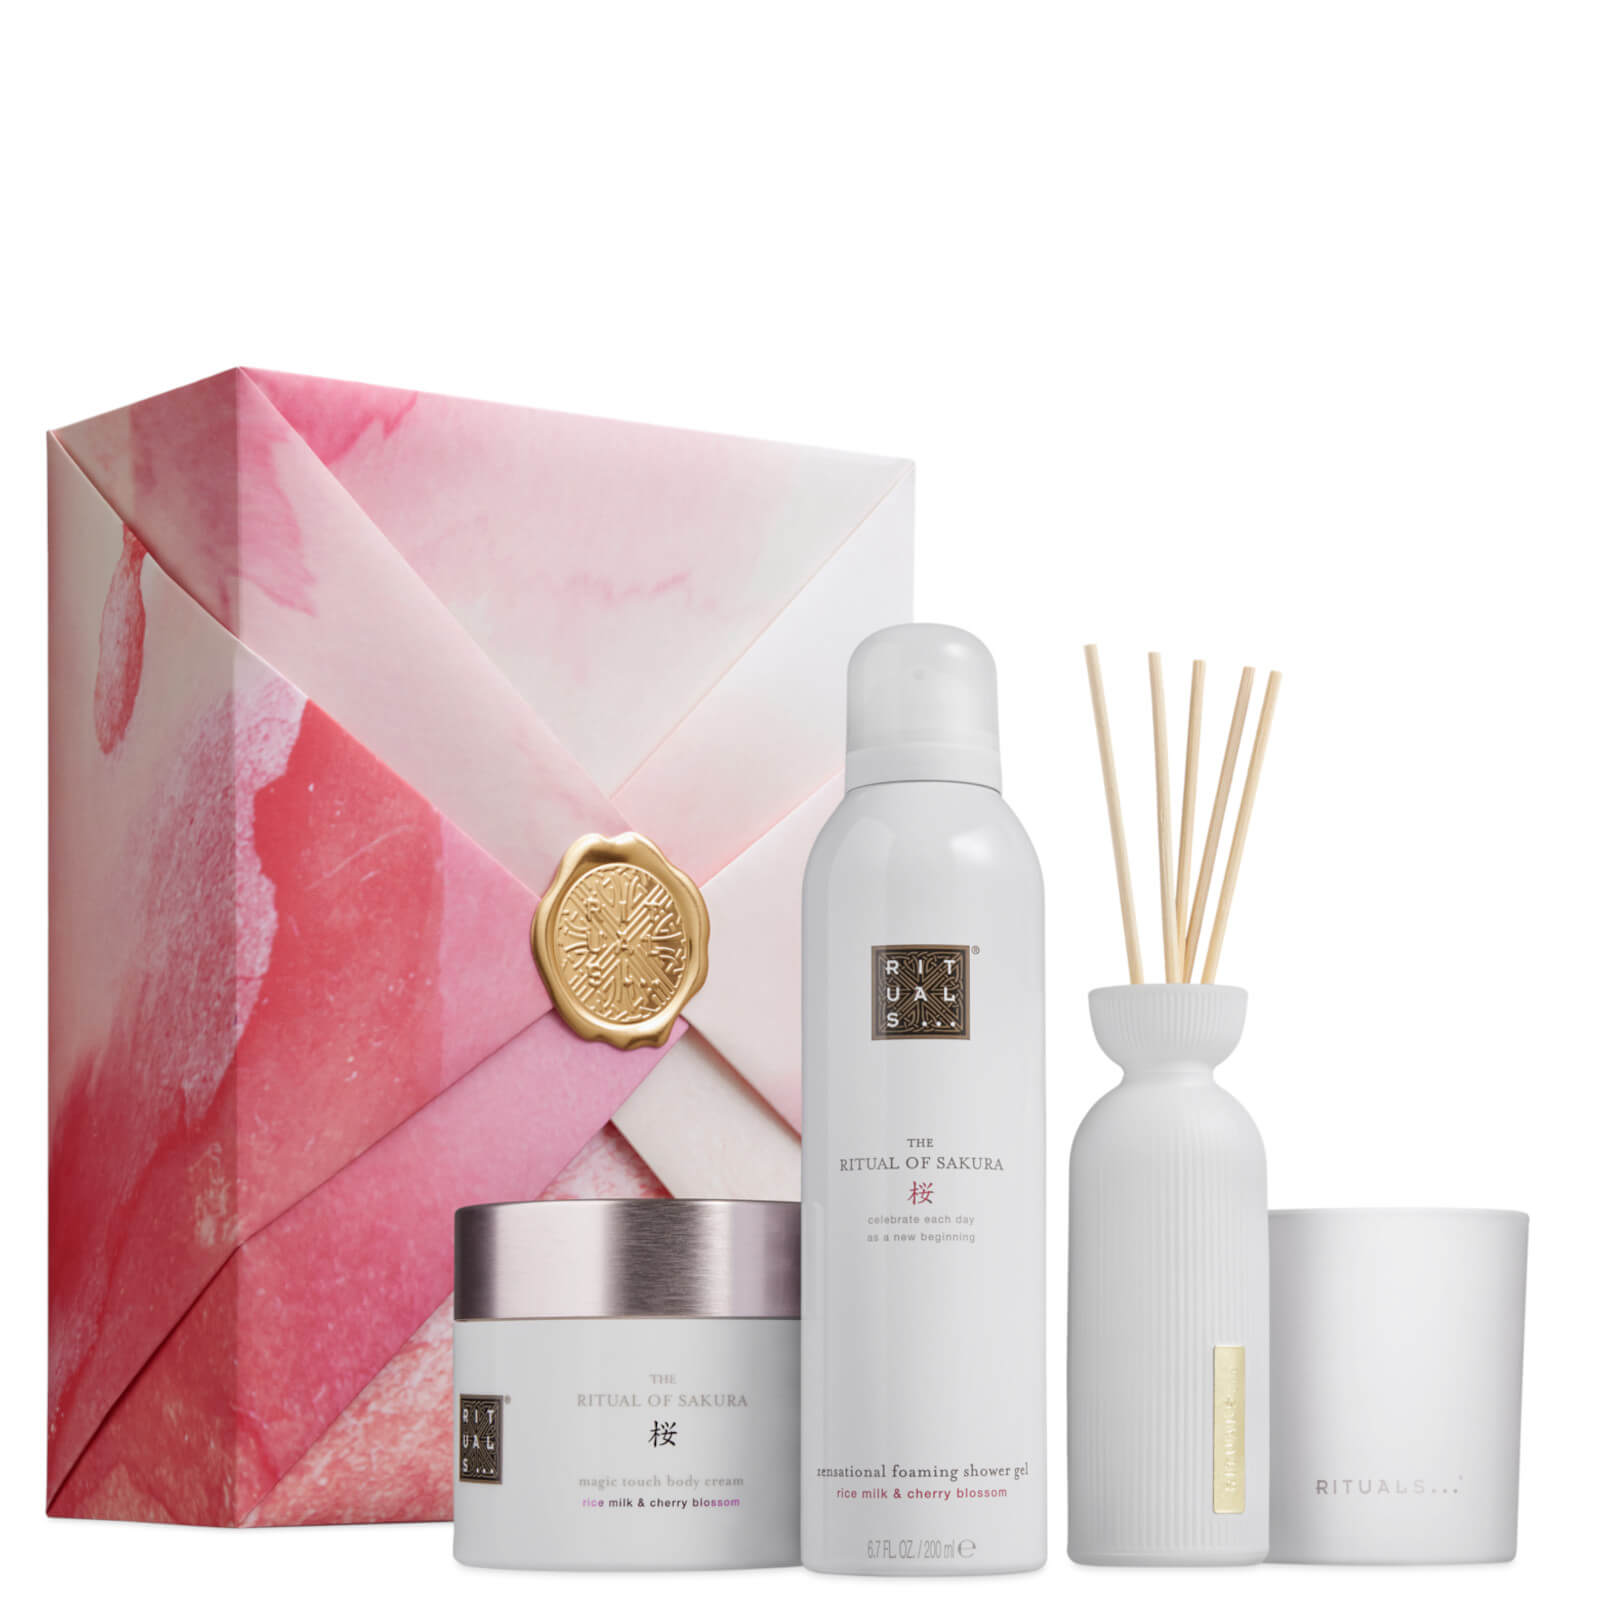 Image of Rituals The Ritual of Sakura Floral Cherry Blossom & Rice Milk Bath and Body Gift Set Large